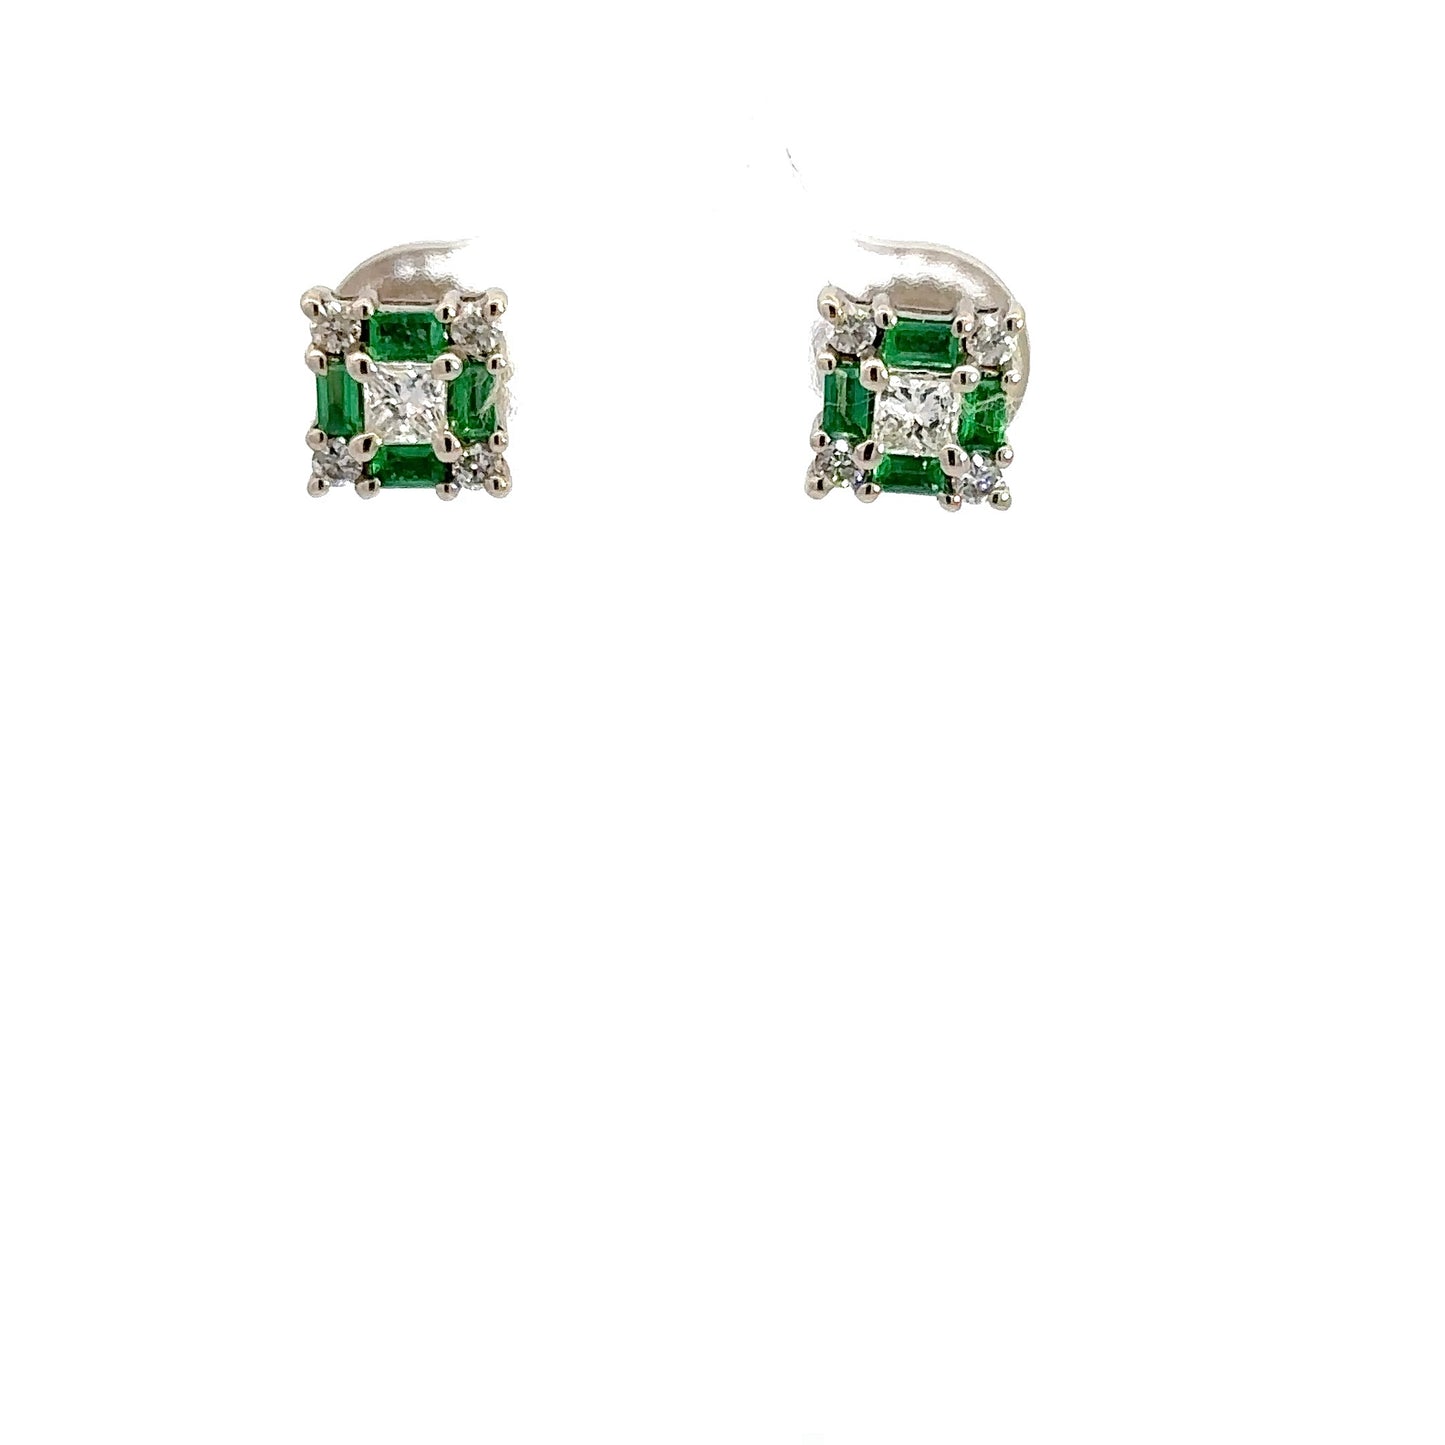 Front of diamond + emerald square earrings with 5 round diamonds + 4 emerald cut emerald gemstones each